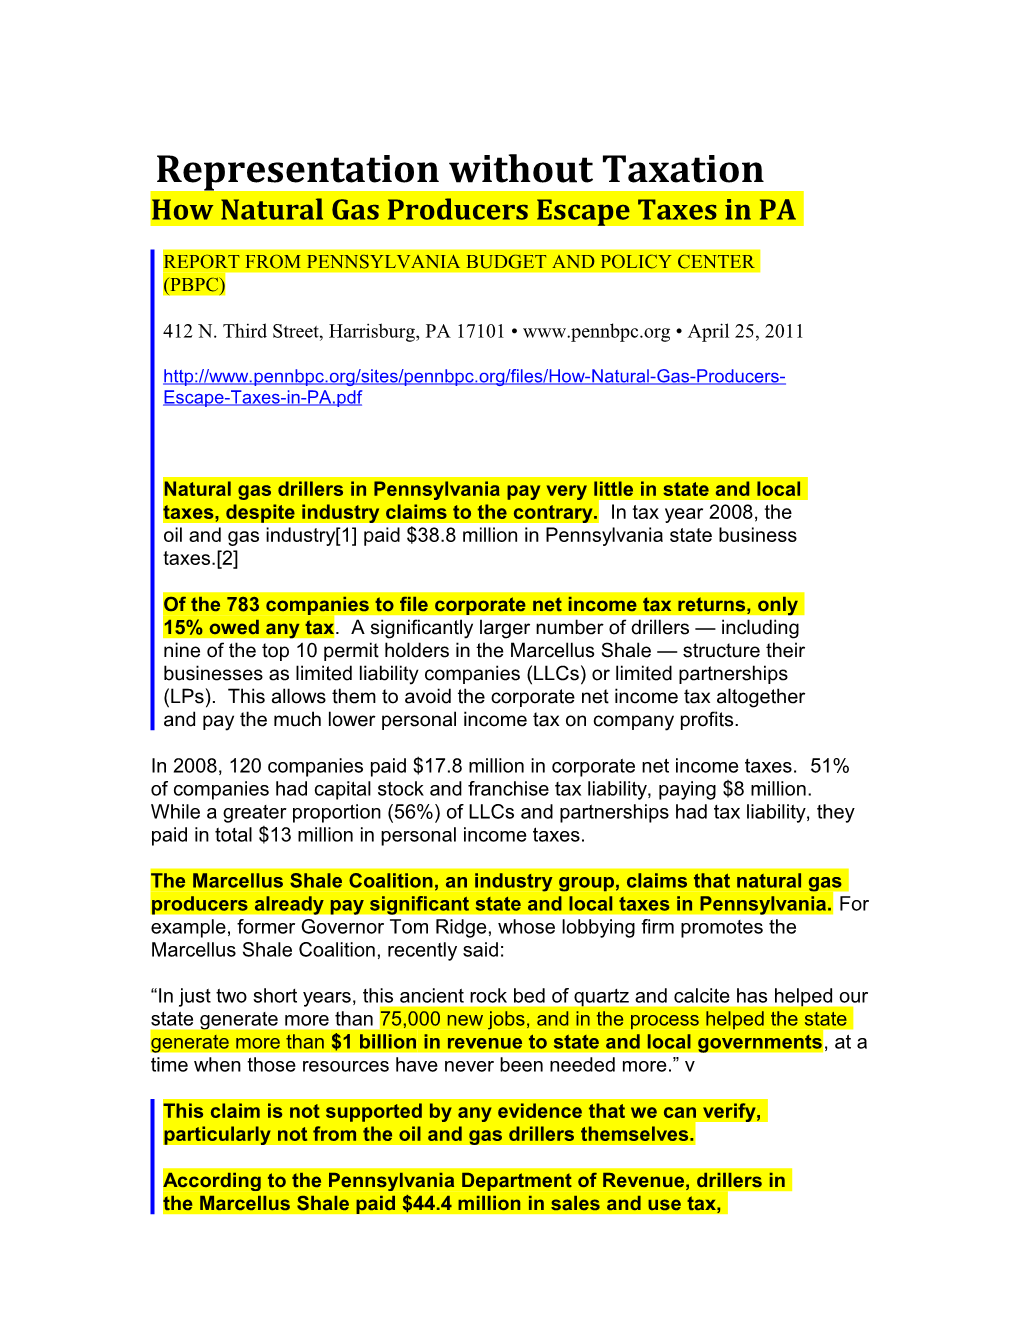 Representation Without Taxation How Natural Gas Producers Escape Taxes in Pennsylvania